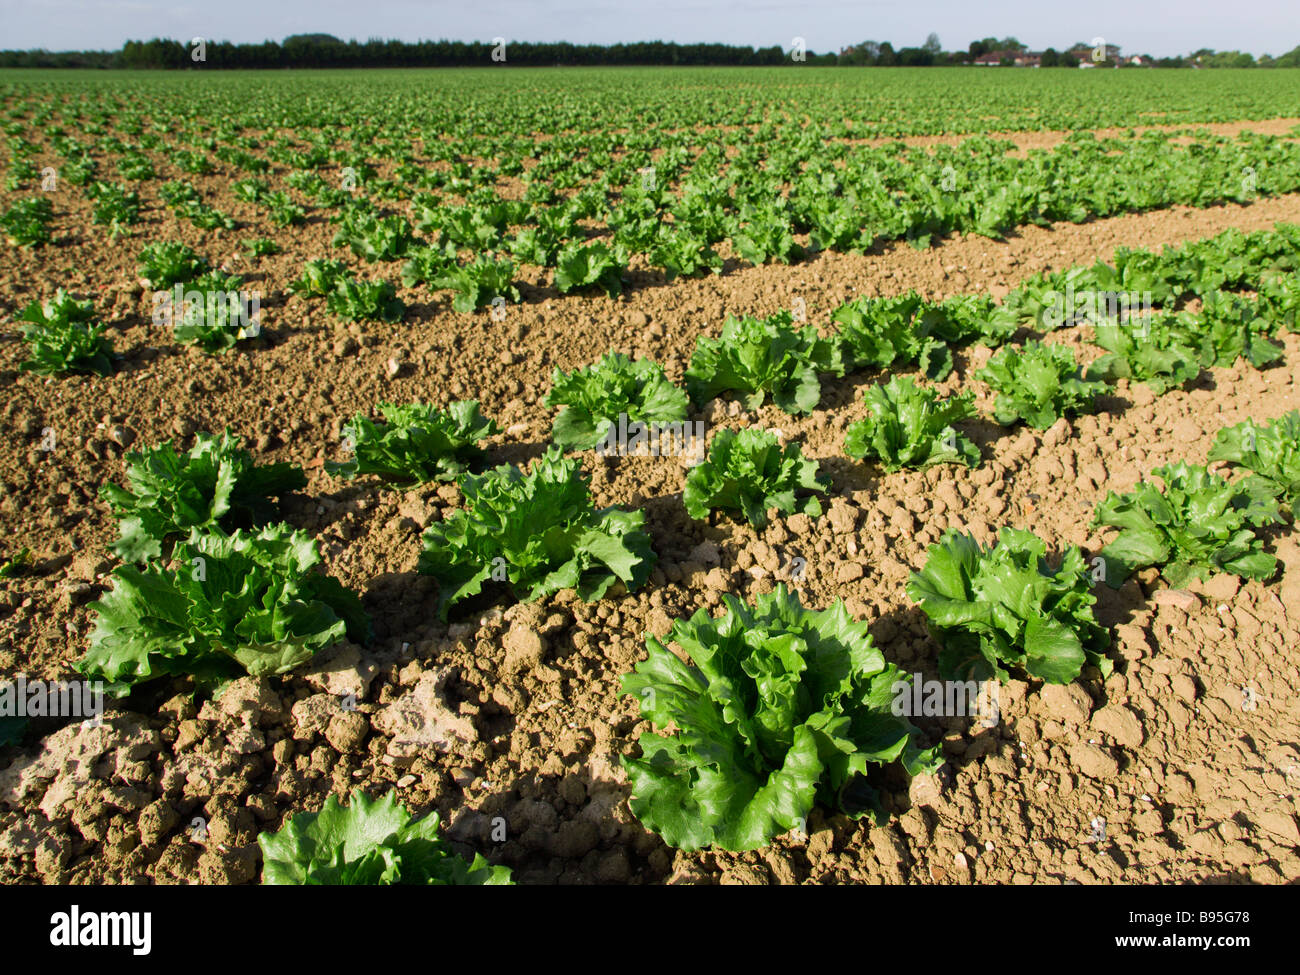 ENGLAND West Sussex Chichester Rows of ripe green lettuces growing in a field viewed from ground level Stock Photo